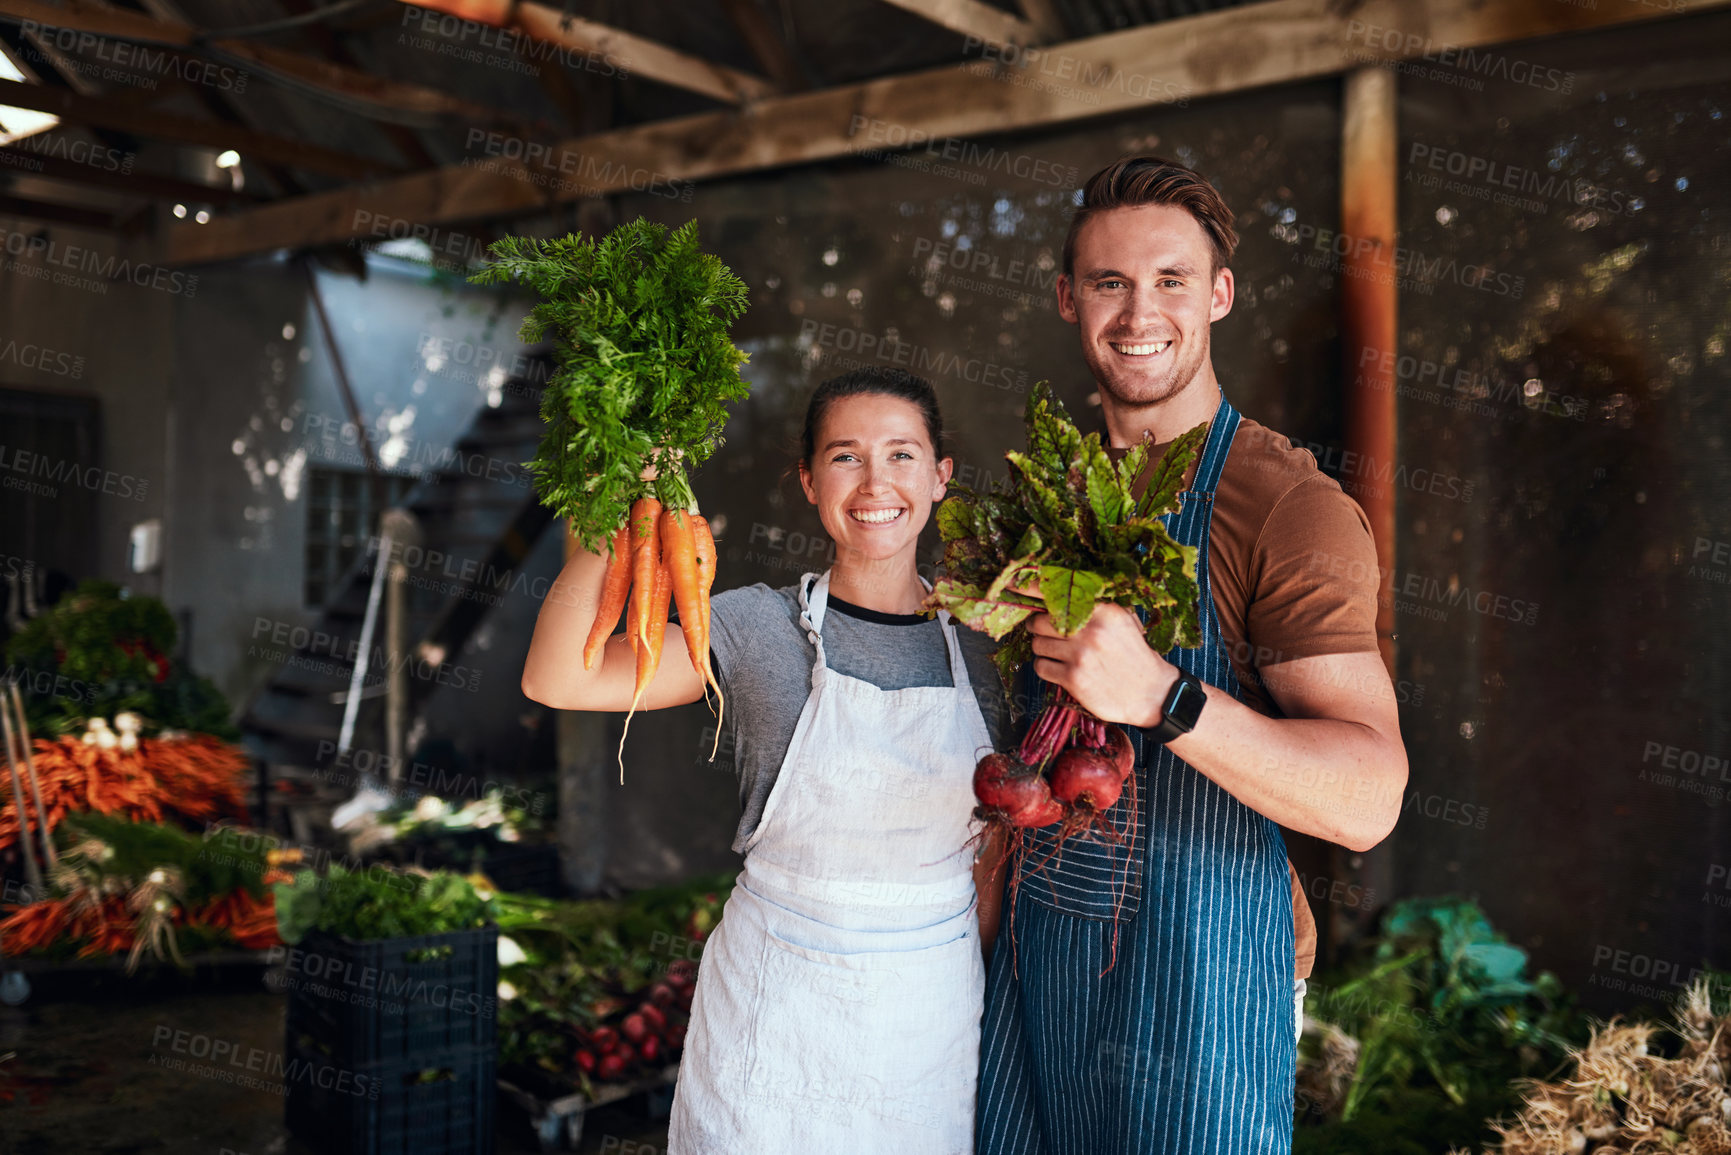 Buy stock photo Portrait of a happy young couple posing together holding bunches of freshly picked carrots and beetroot at their farm